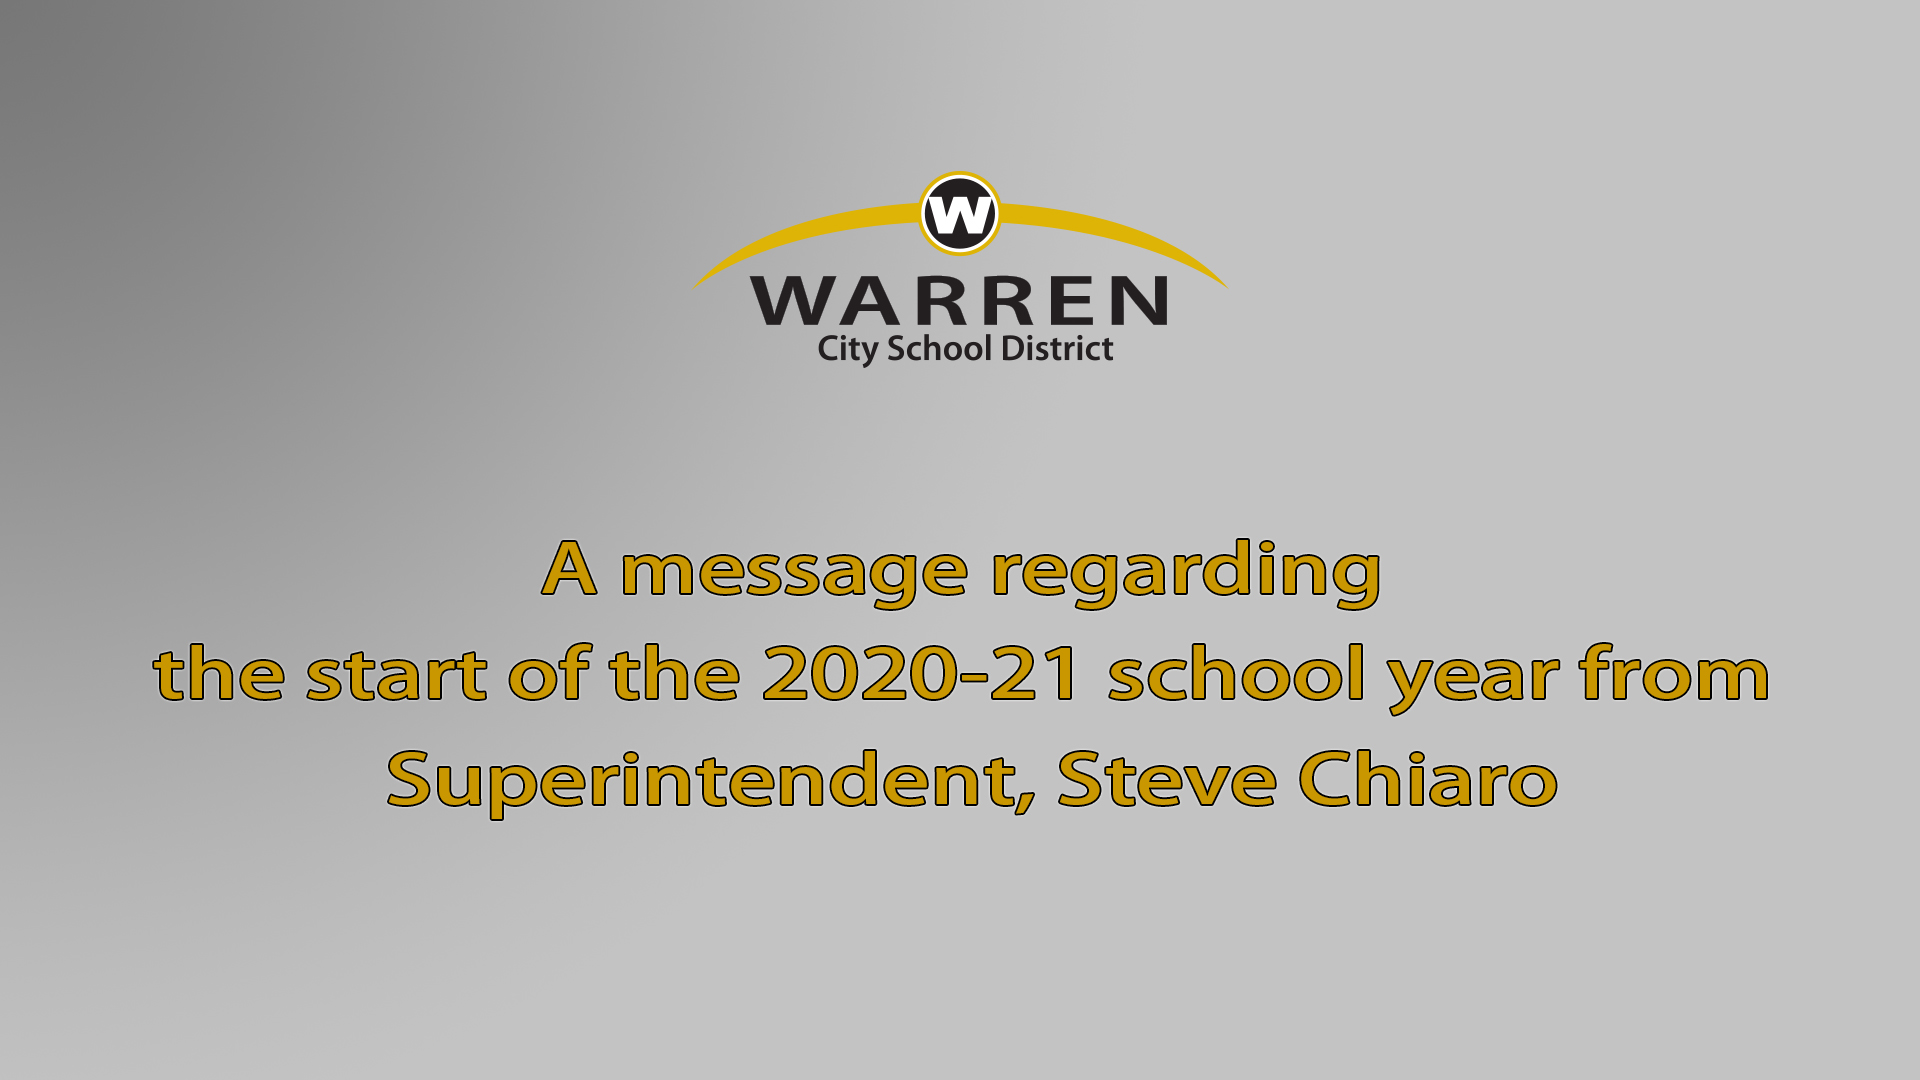 A message regarding the start of the 2020-21 school year from Superintendent, Steve Chiaro